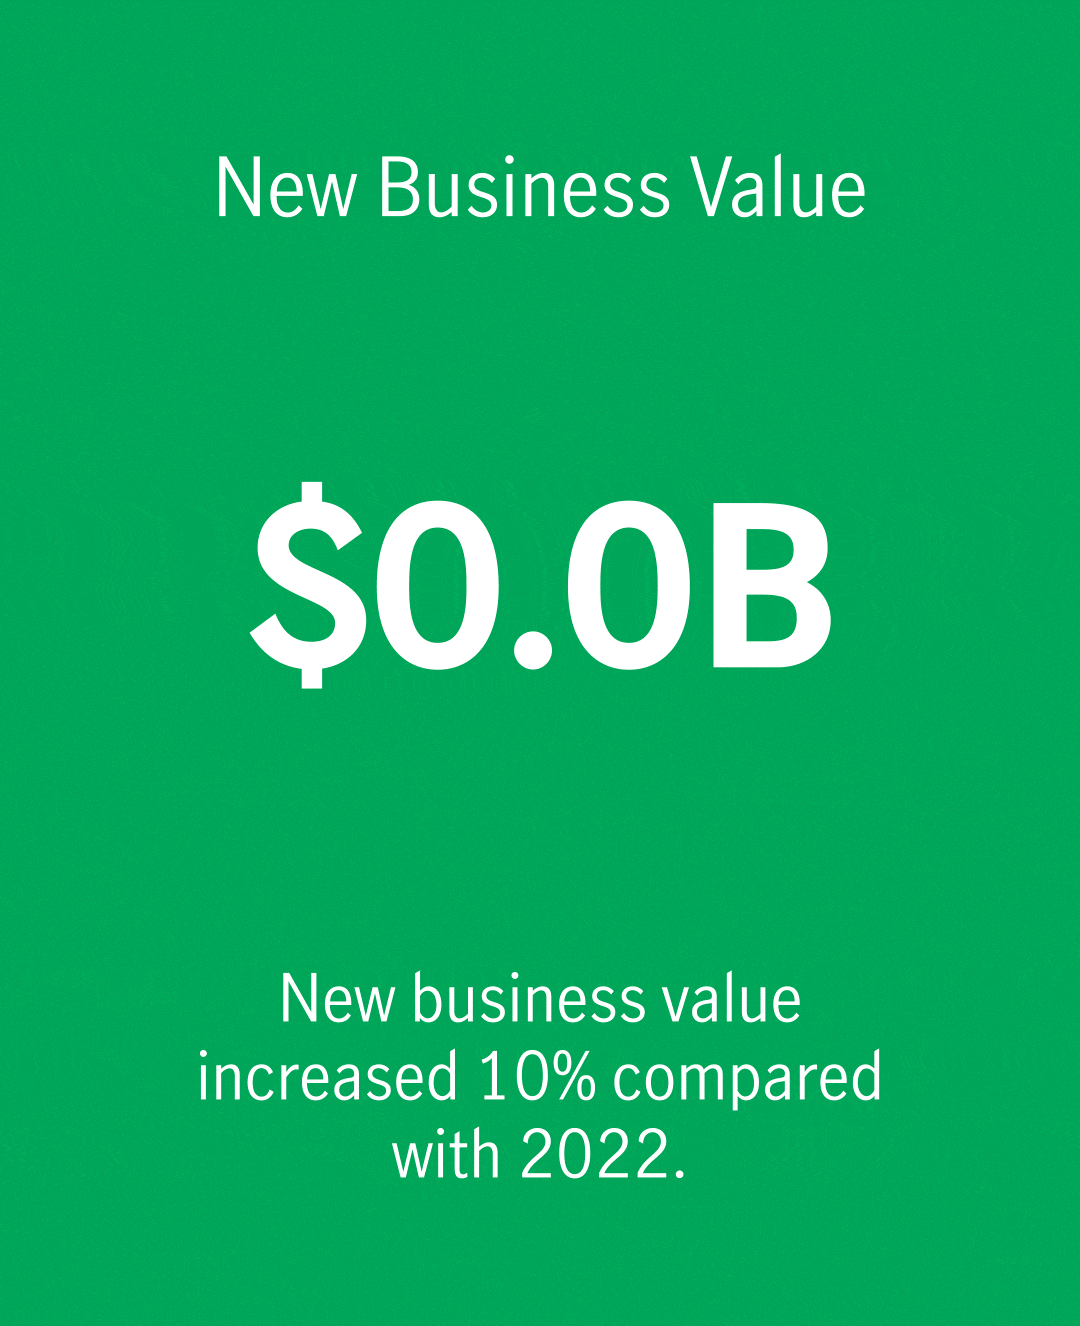 New business value of $2.3B